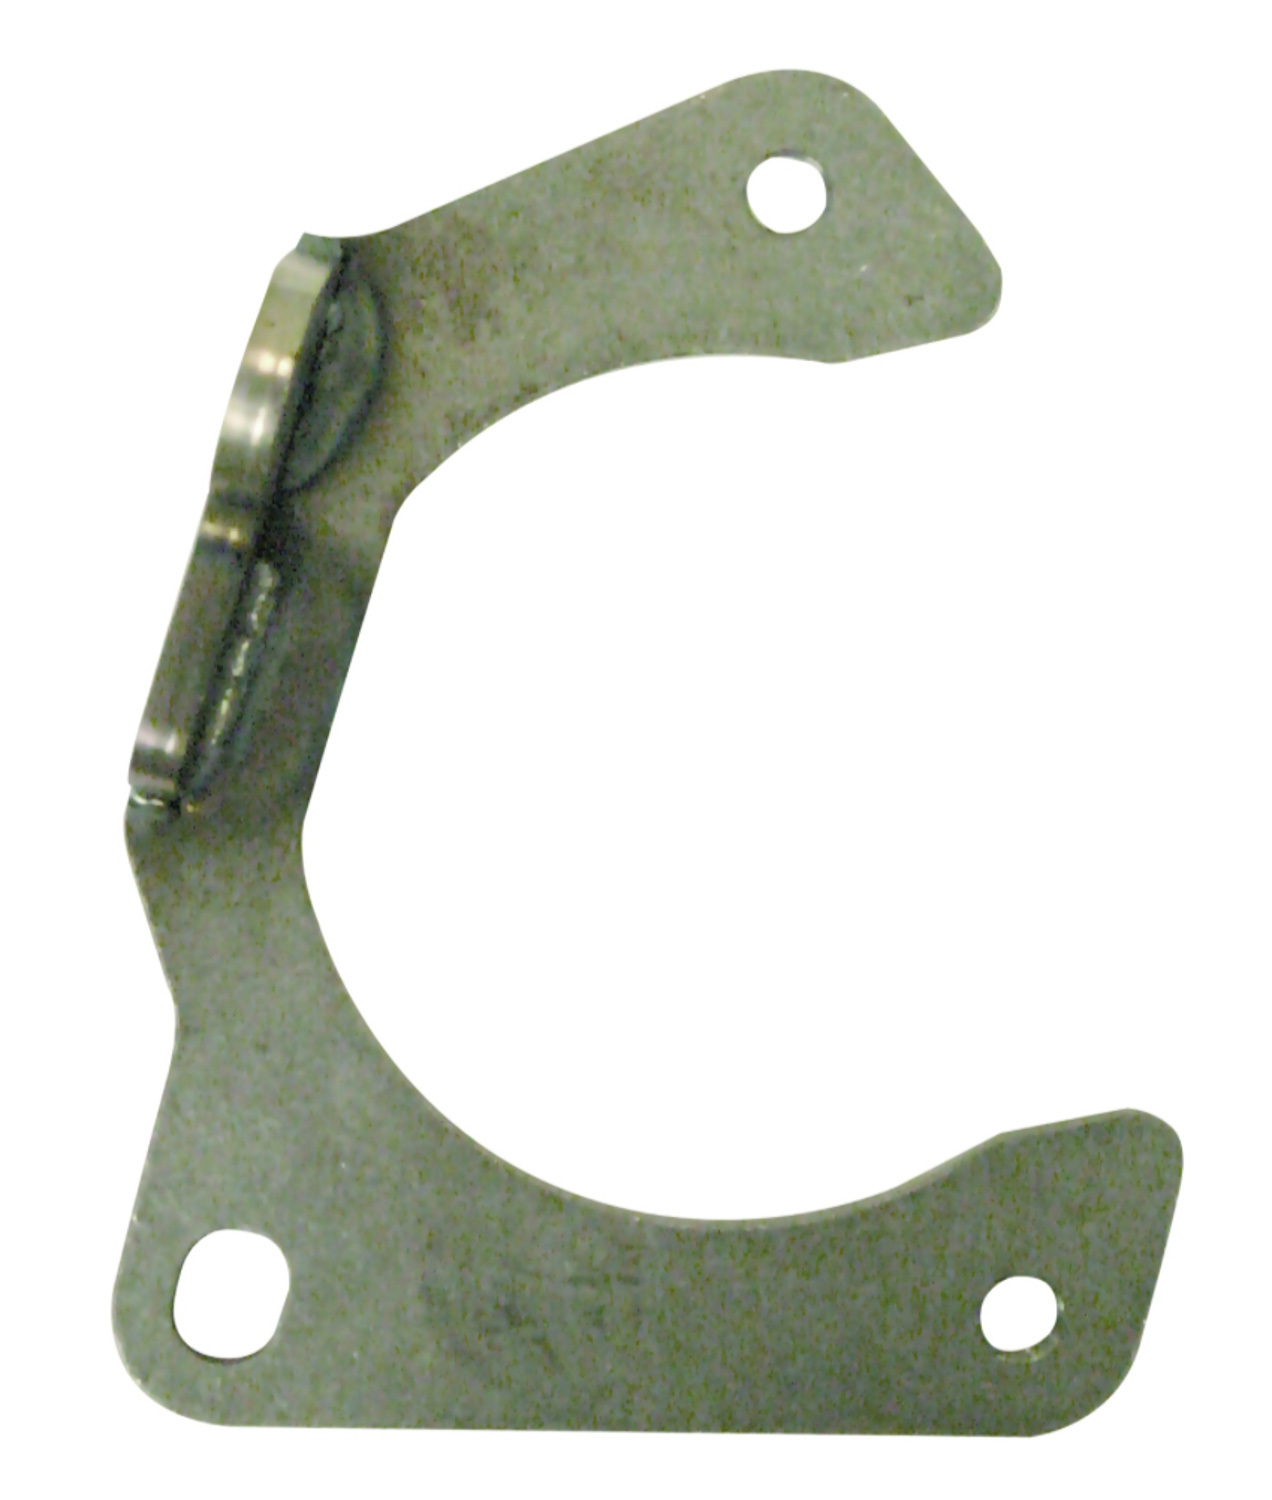 AFCO Racing Products 40122PL Brake Caliper Bracket, Front, Driver Side Mount, Bolt-On, Steel, Hybrid Rotor, GM Metric Caliper, Mustang II / Pinto, Each